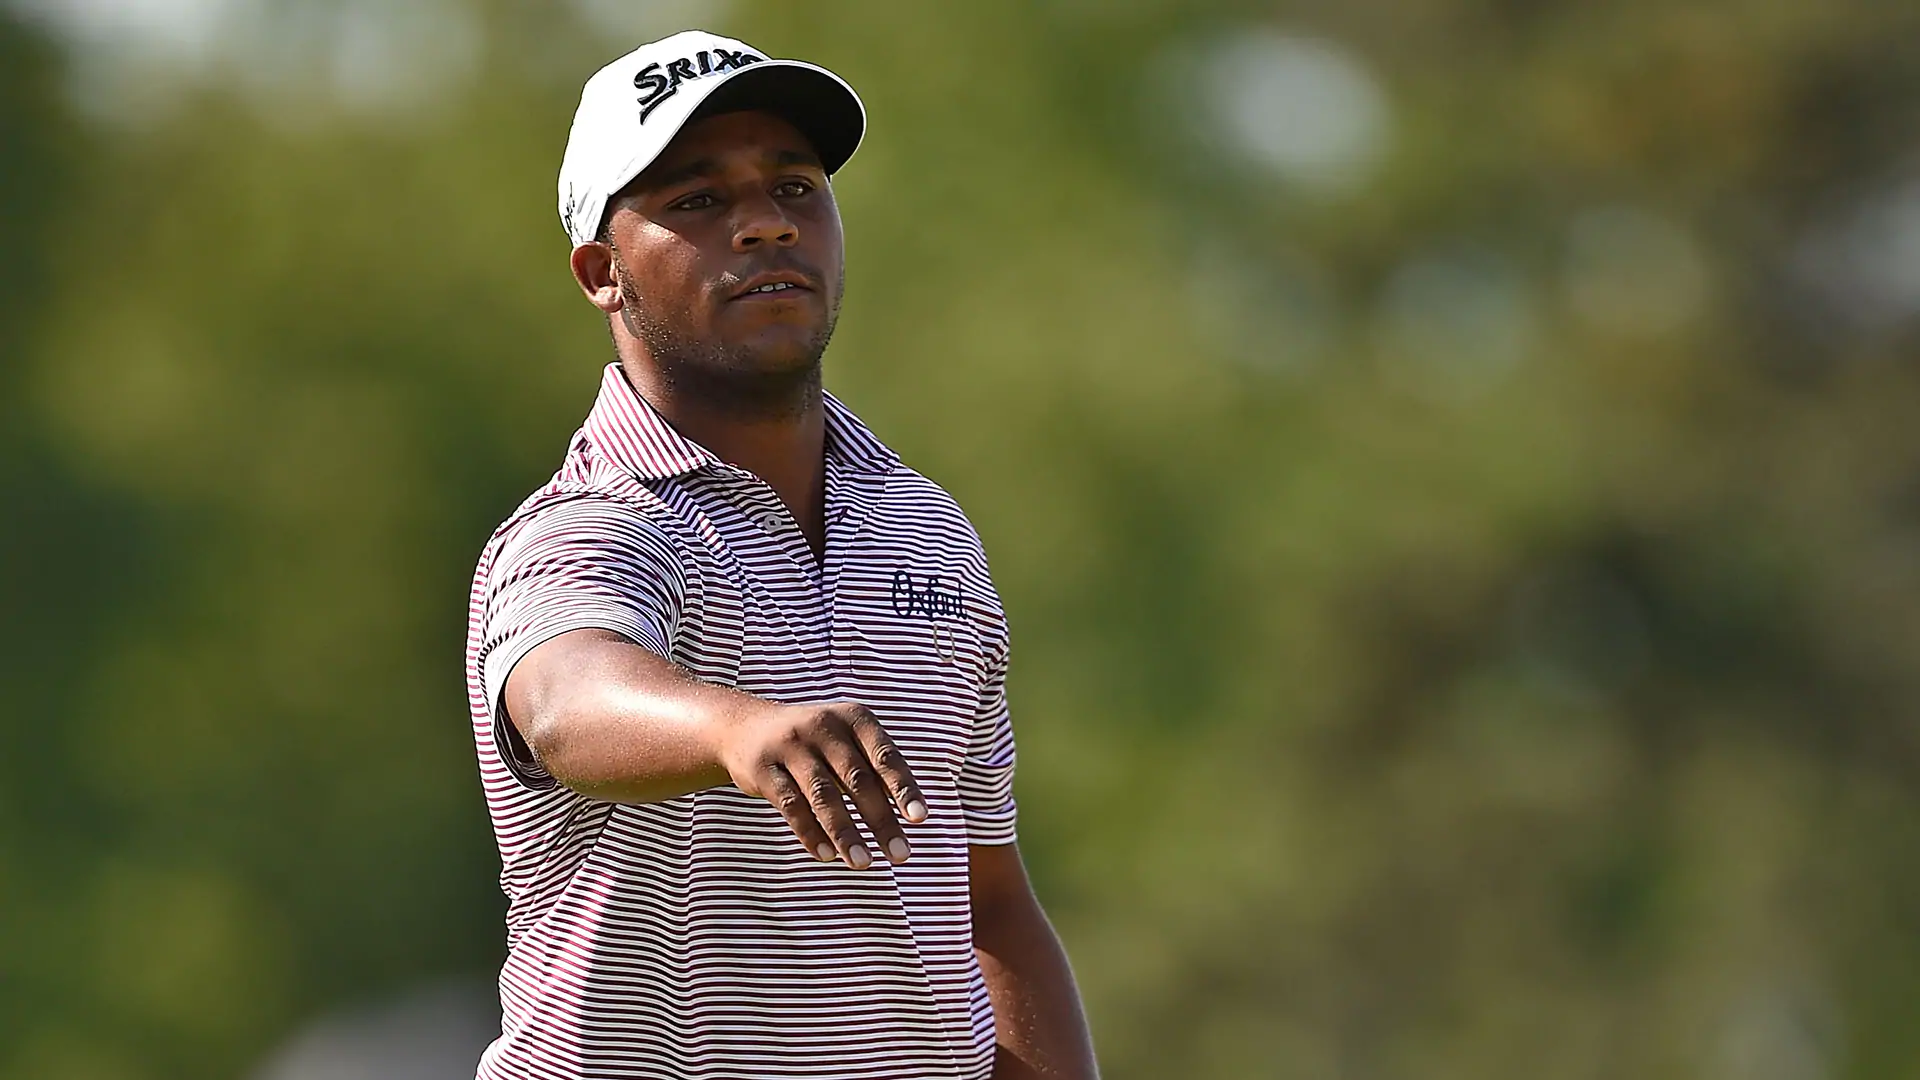 Varner III, Saunders go low with cards on the line